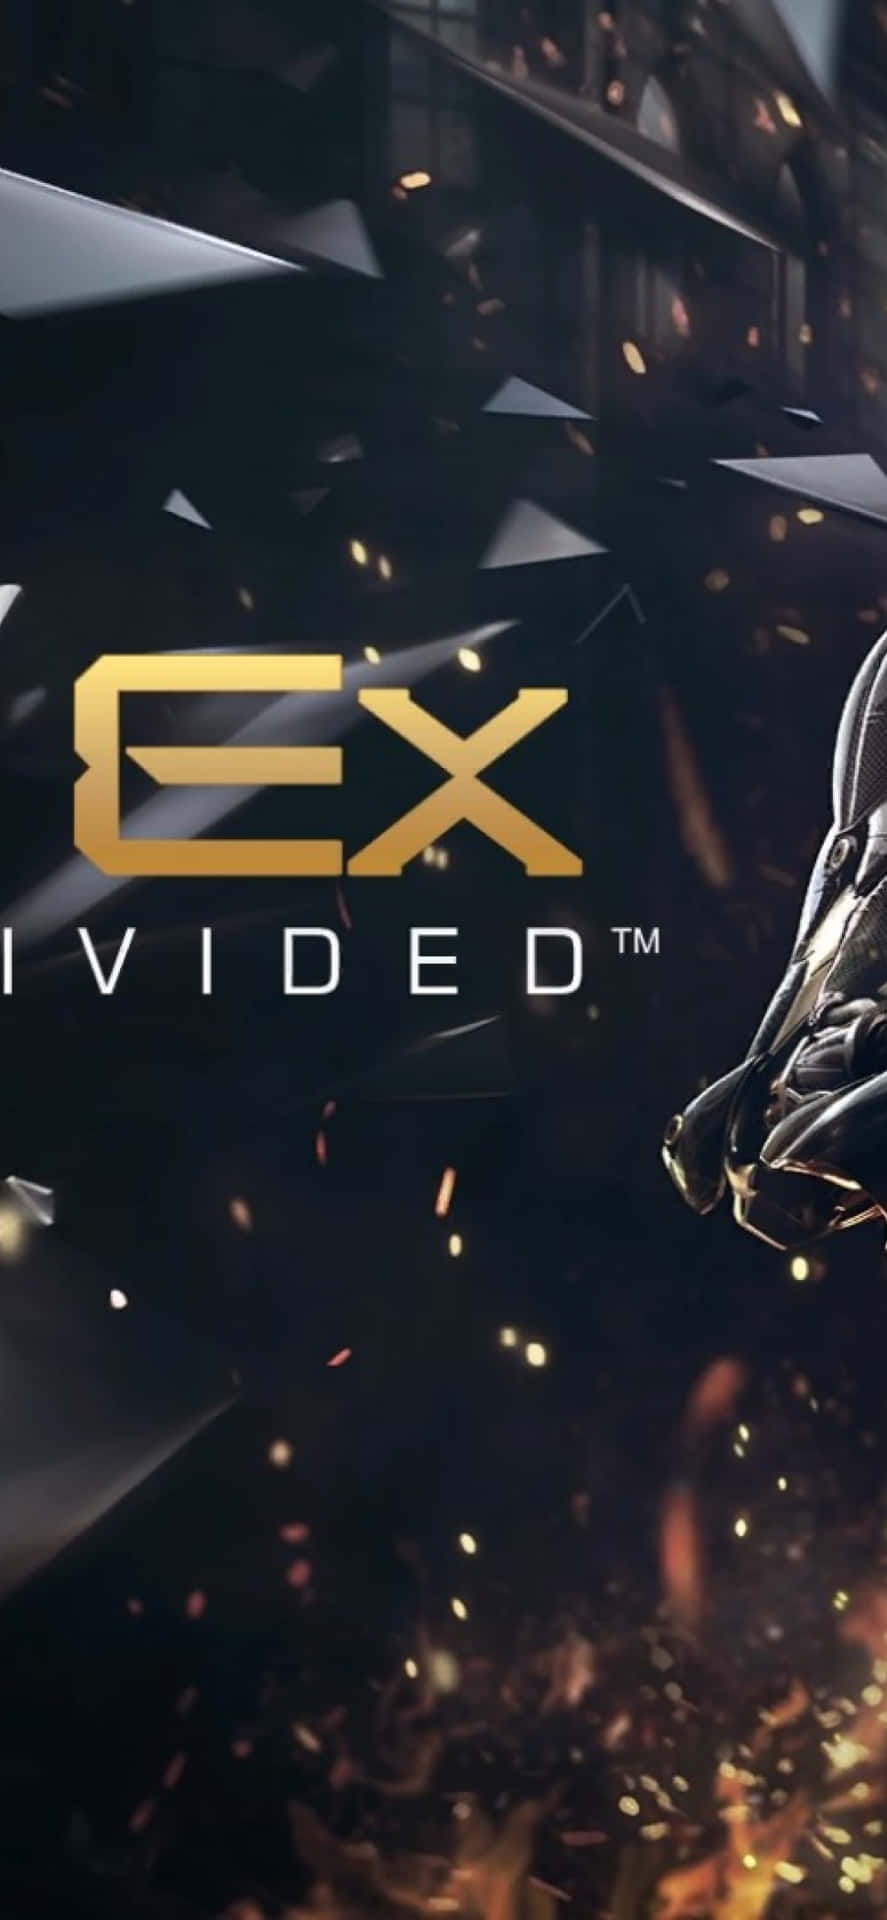 The Cyberpunk World of Android Deus Ex: Mankind Divided